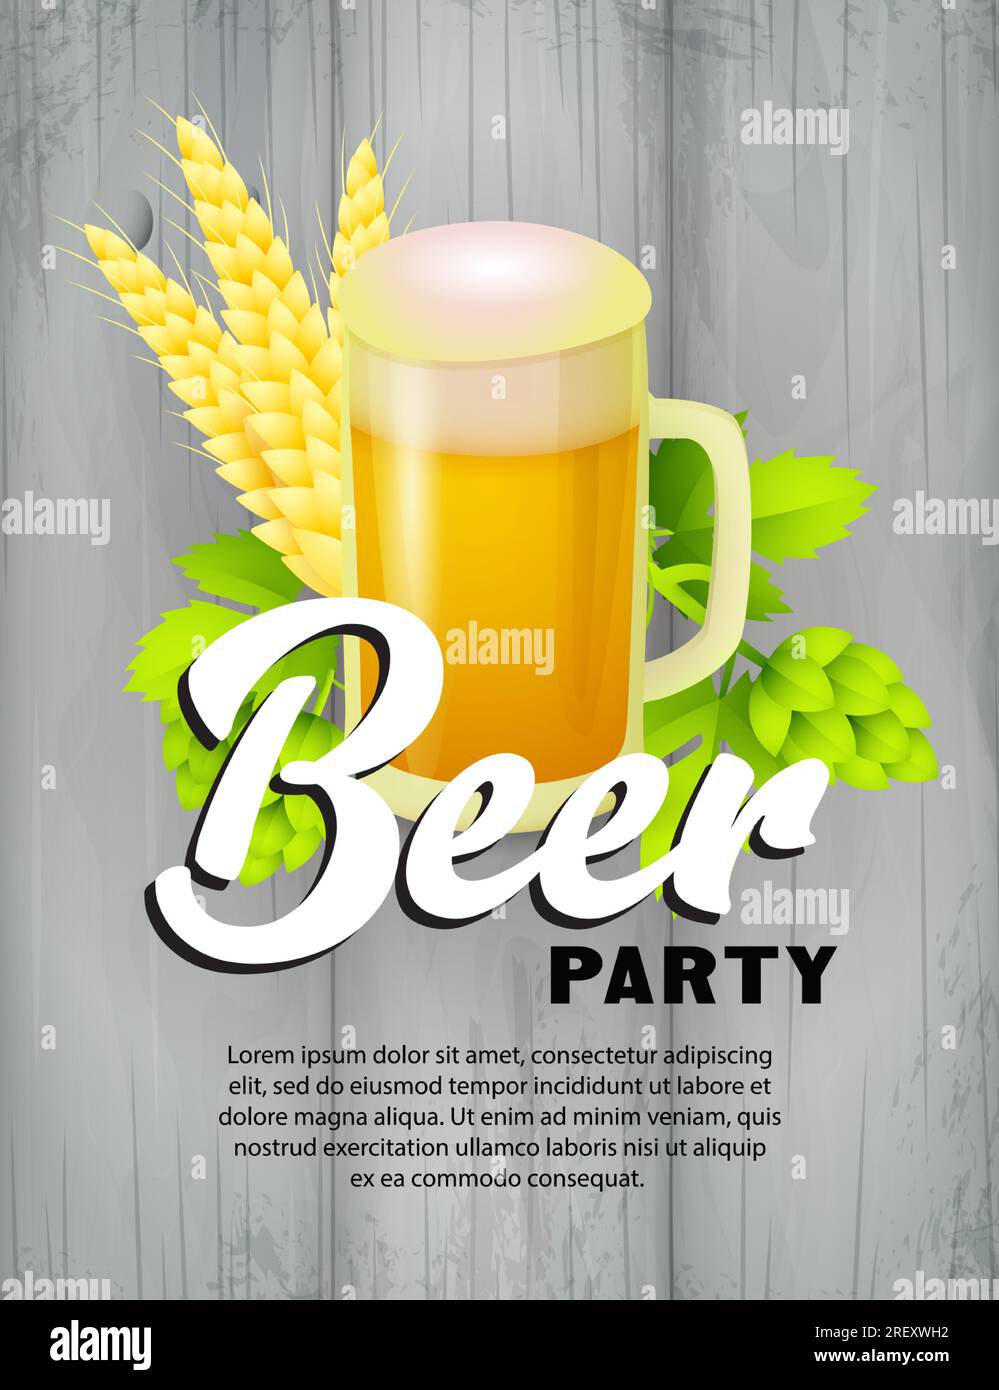 Beer party lettering Stock Vector